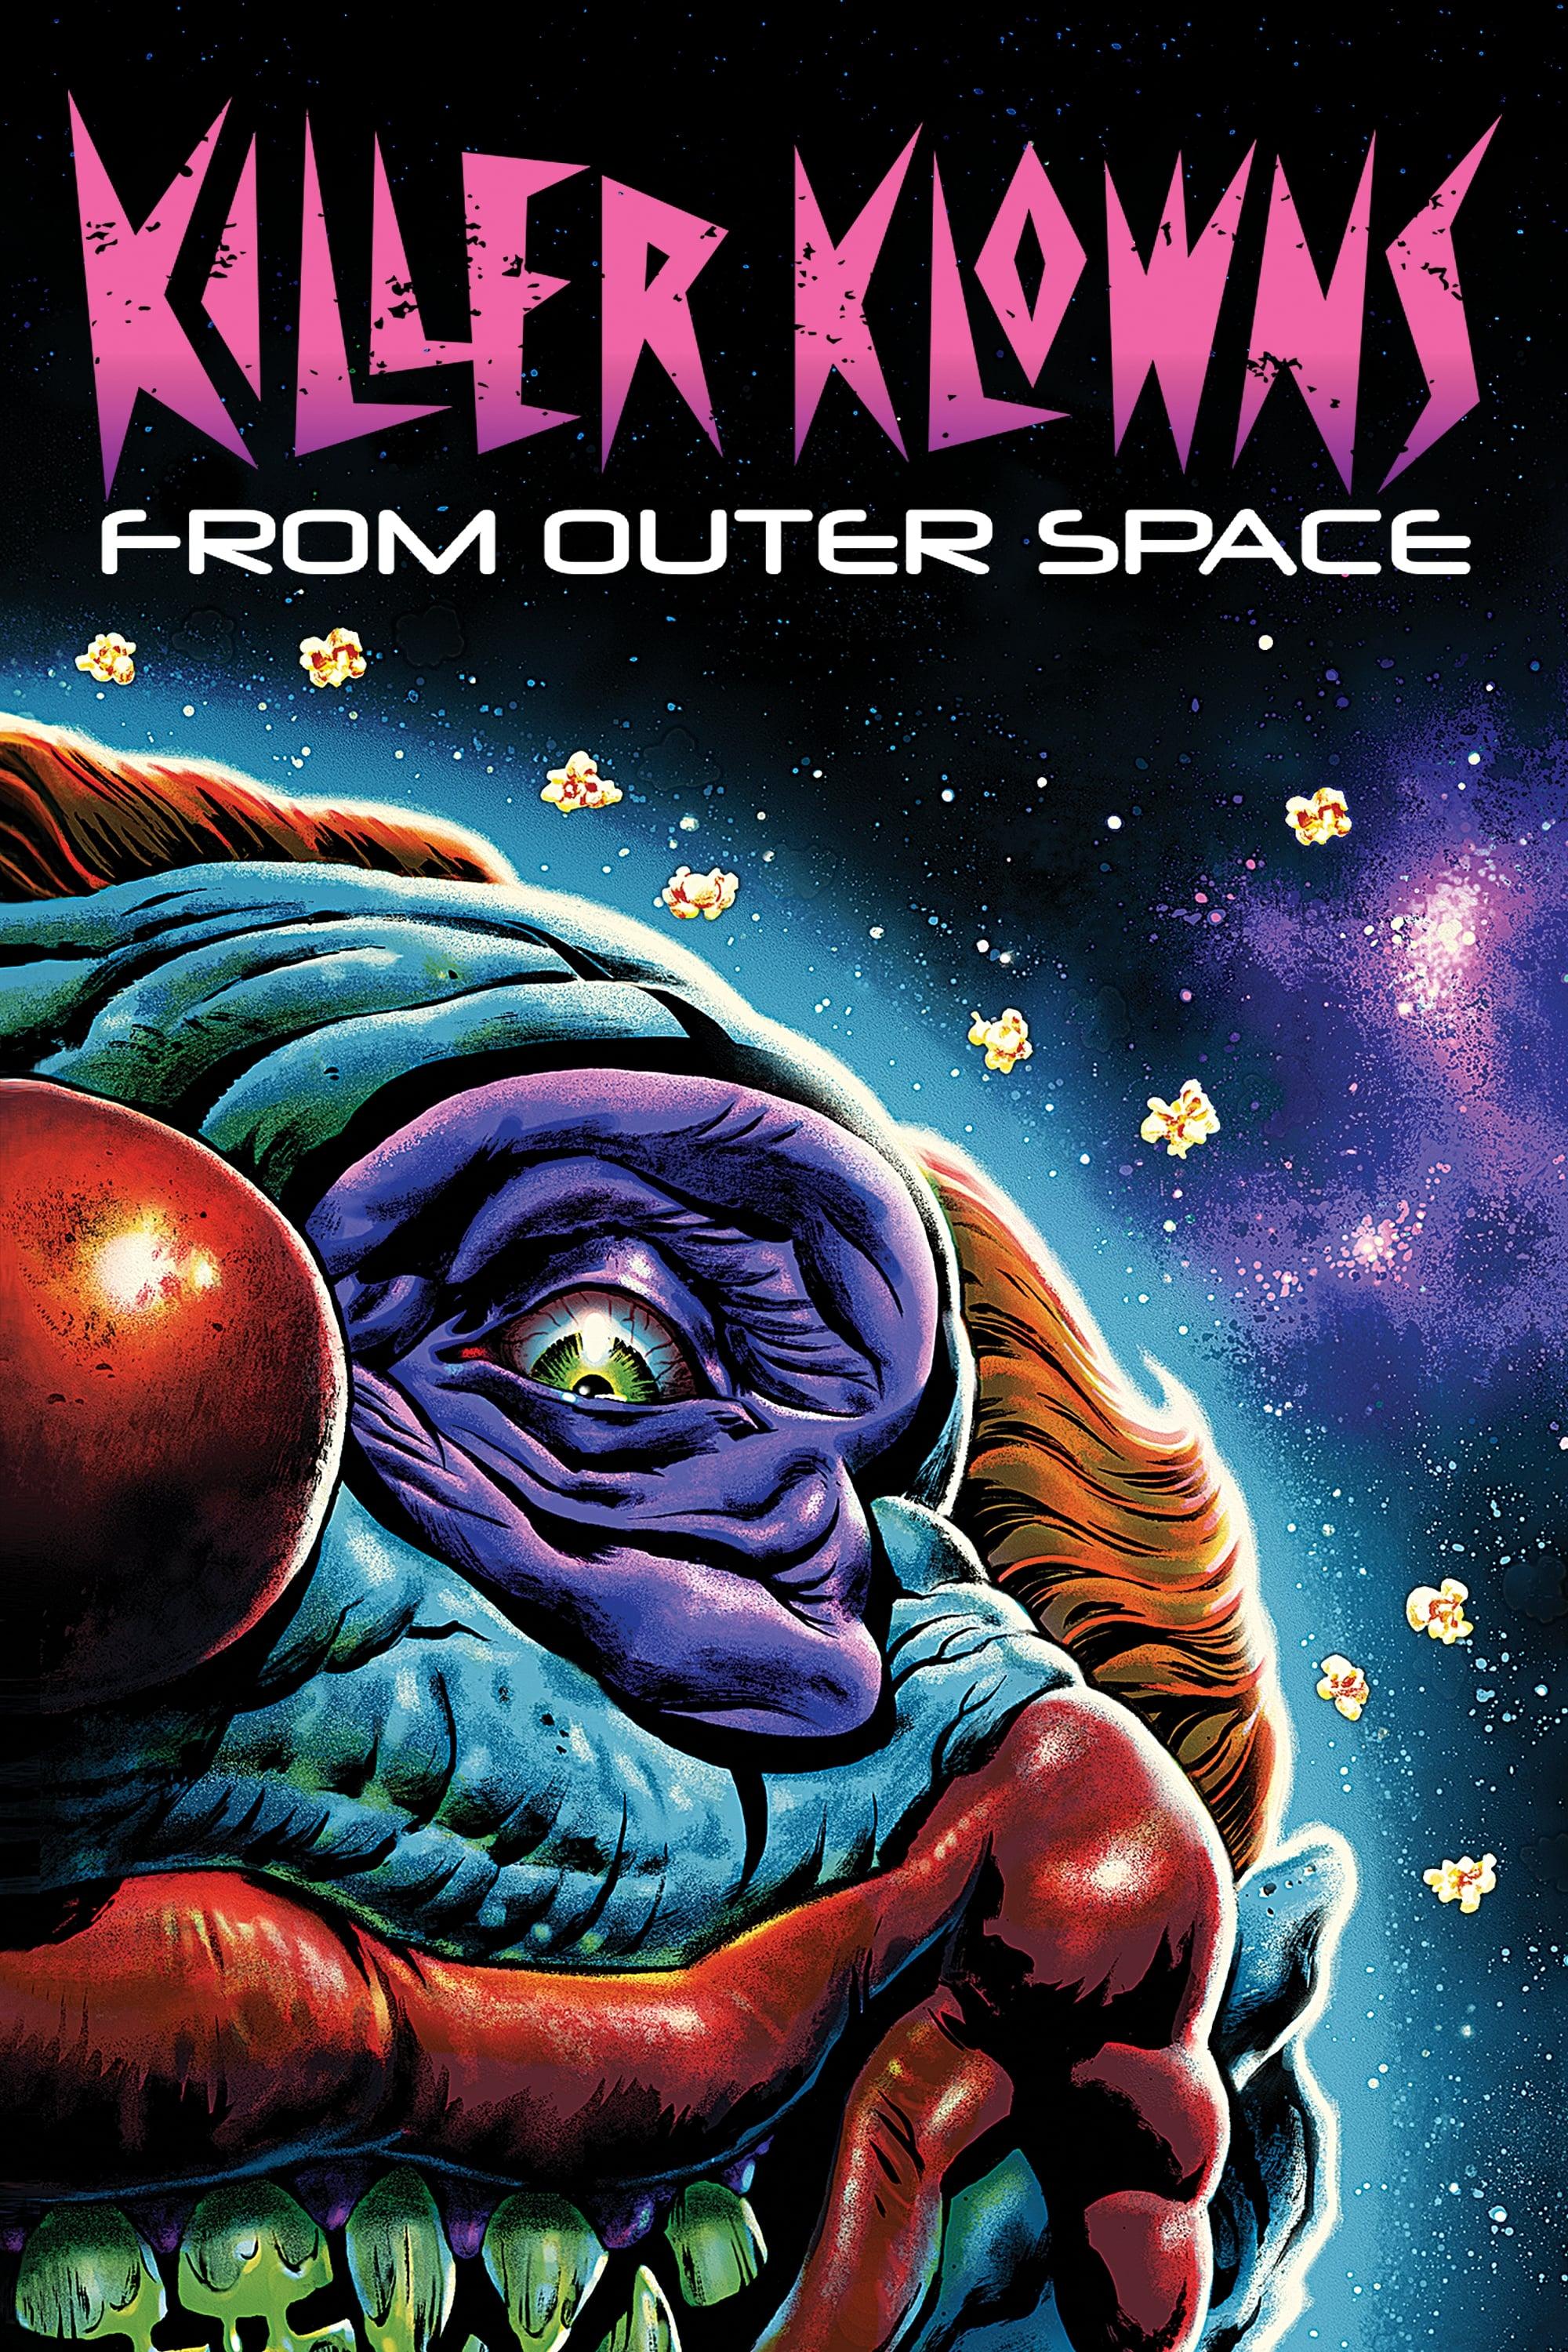 Killer Klowns from Outer Space poster